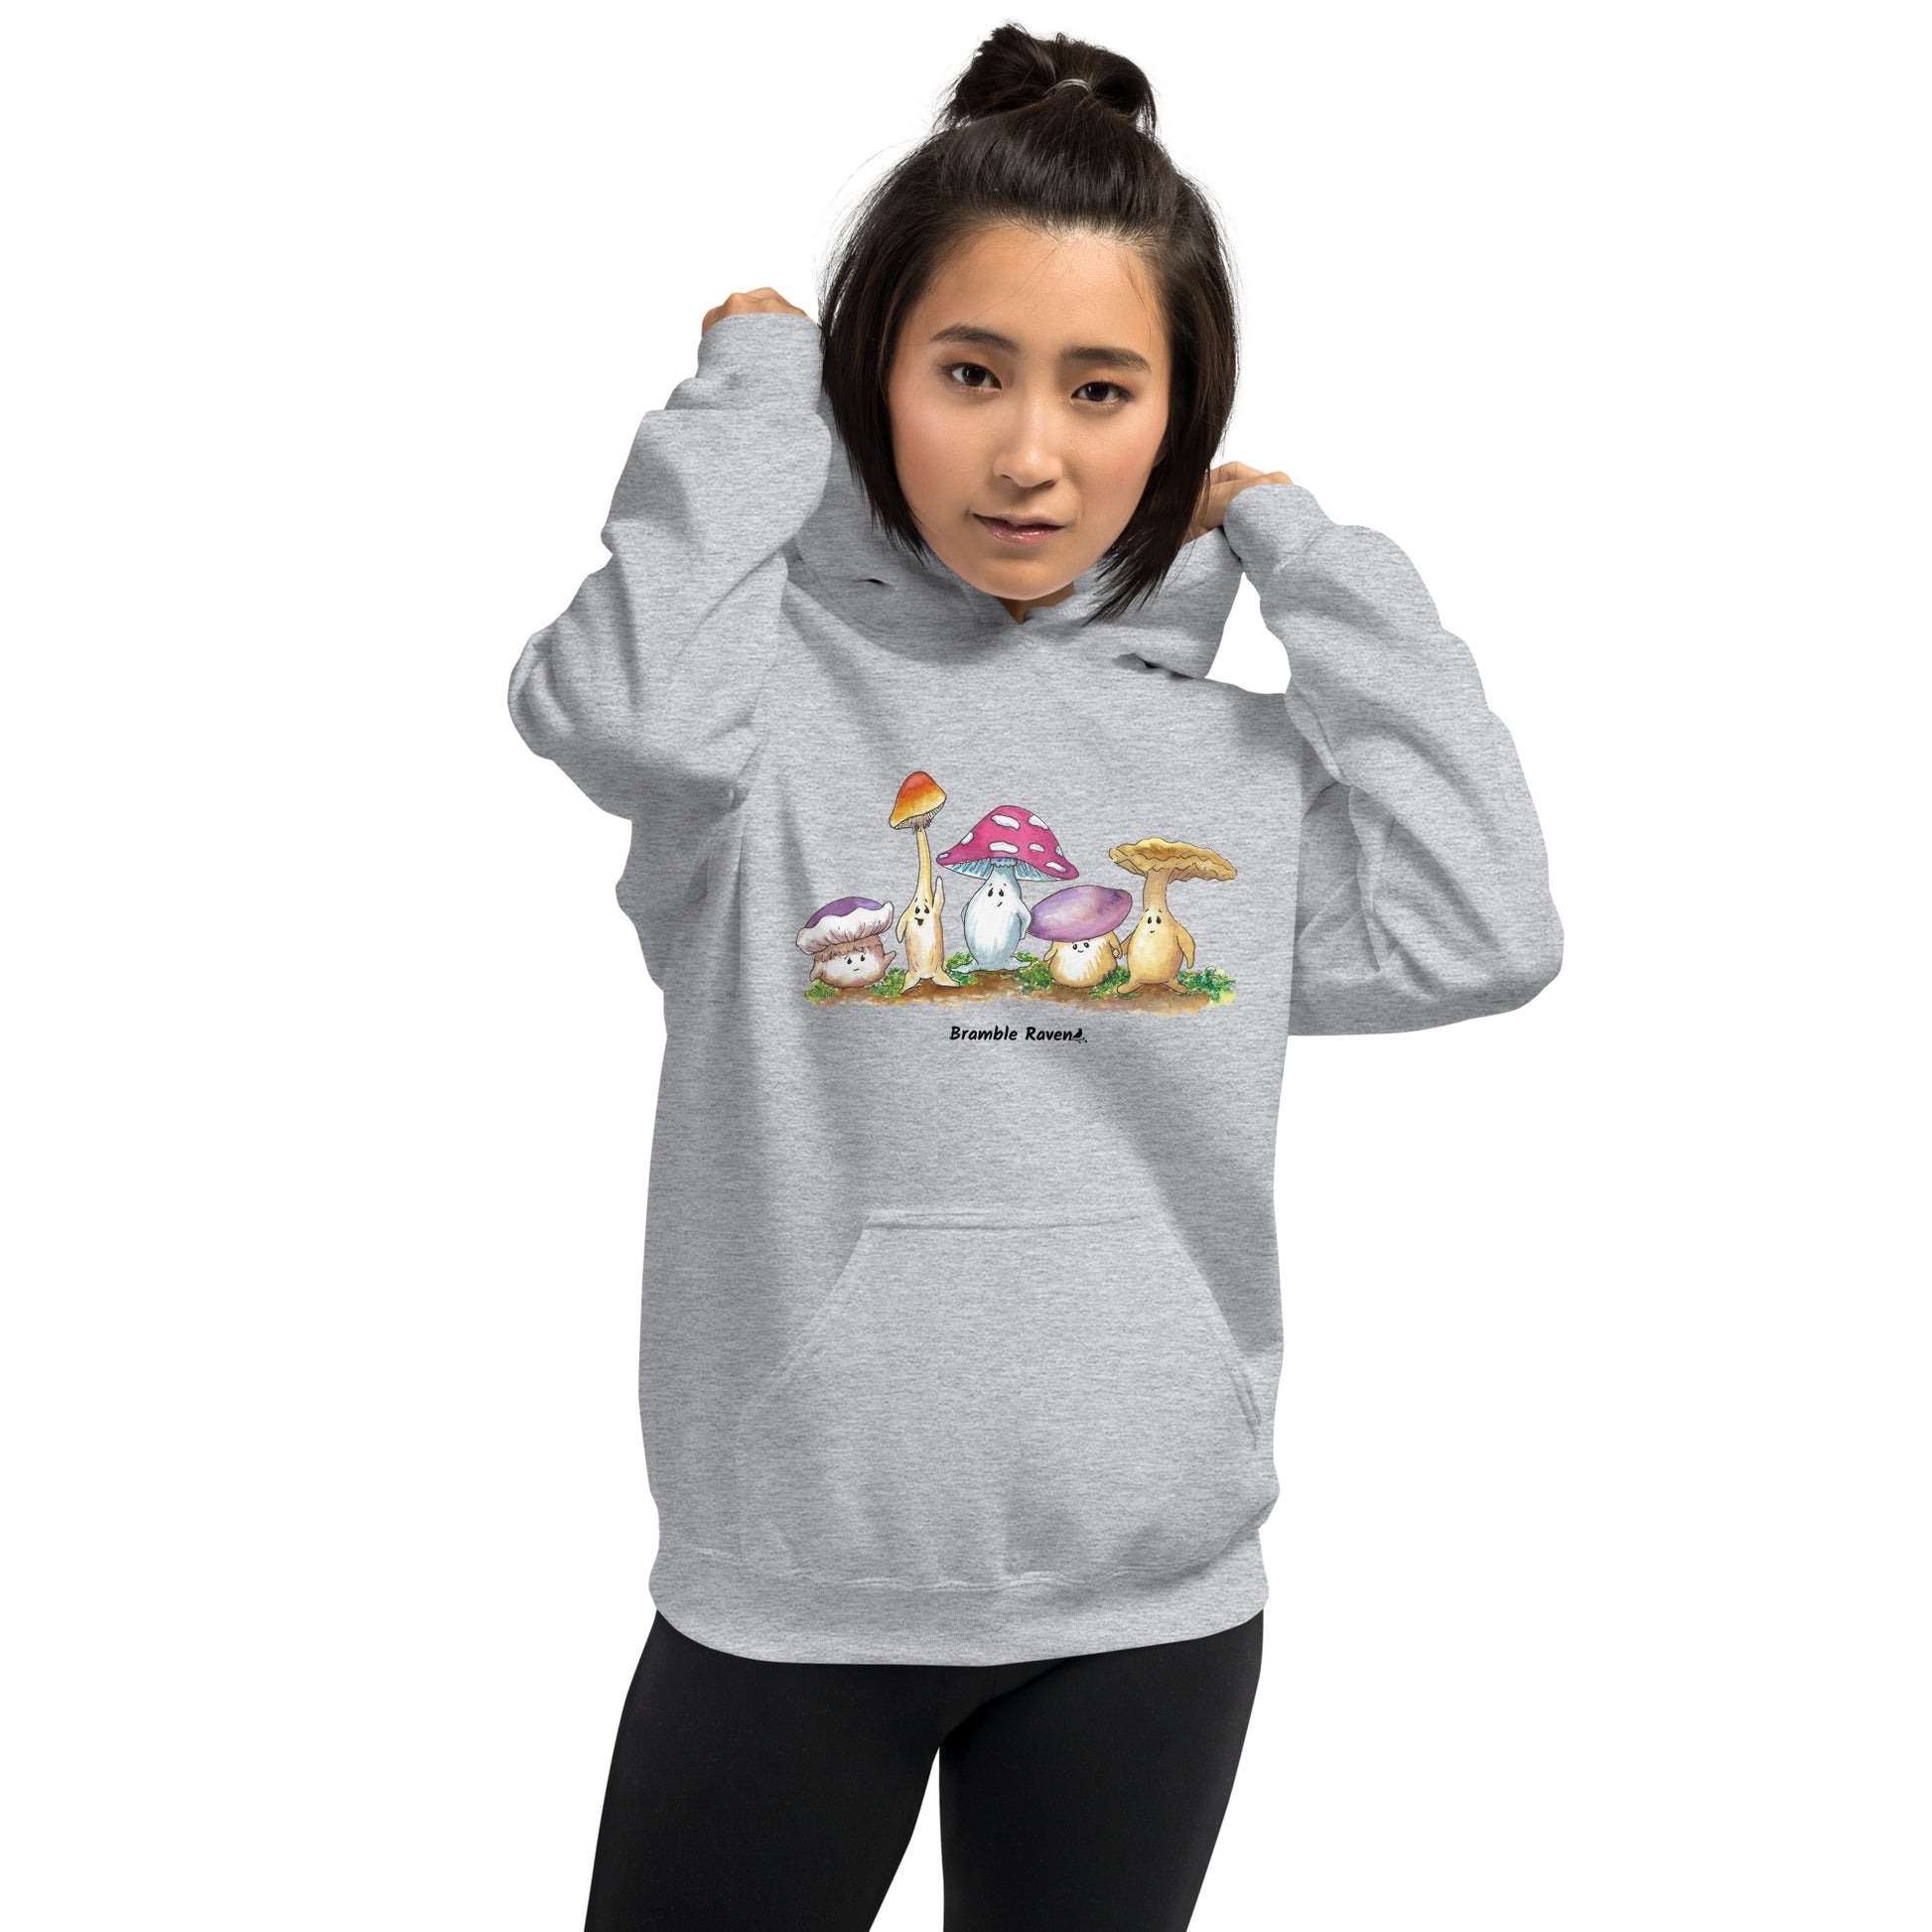 Sport grey colored unisex cotton/polyester blend hoodie. Features front design of Mushy and his whimsical mushroom friends. Hoodie has double lined hood, front pouch pocket, rib knit cuffs and stretchy waistband. Shown on female model.